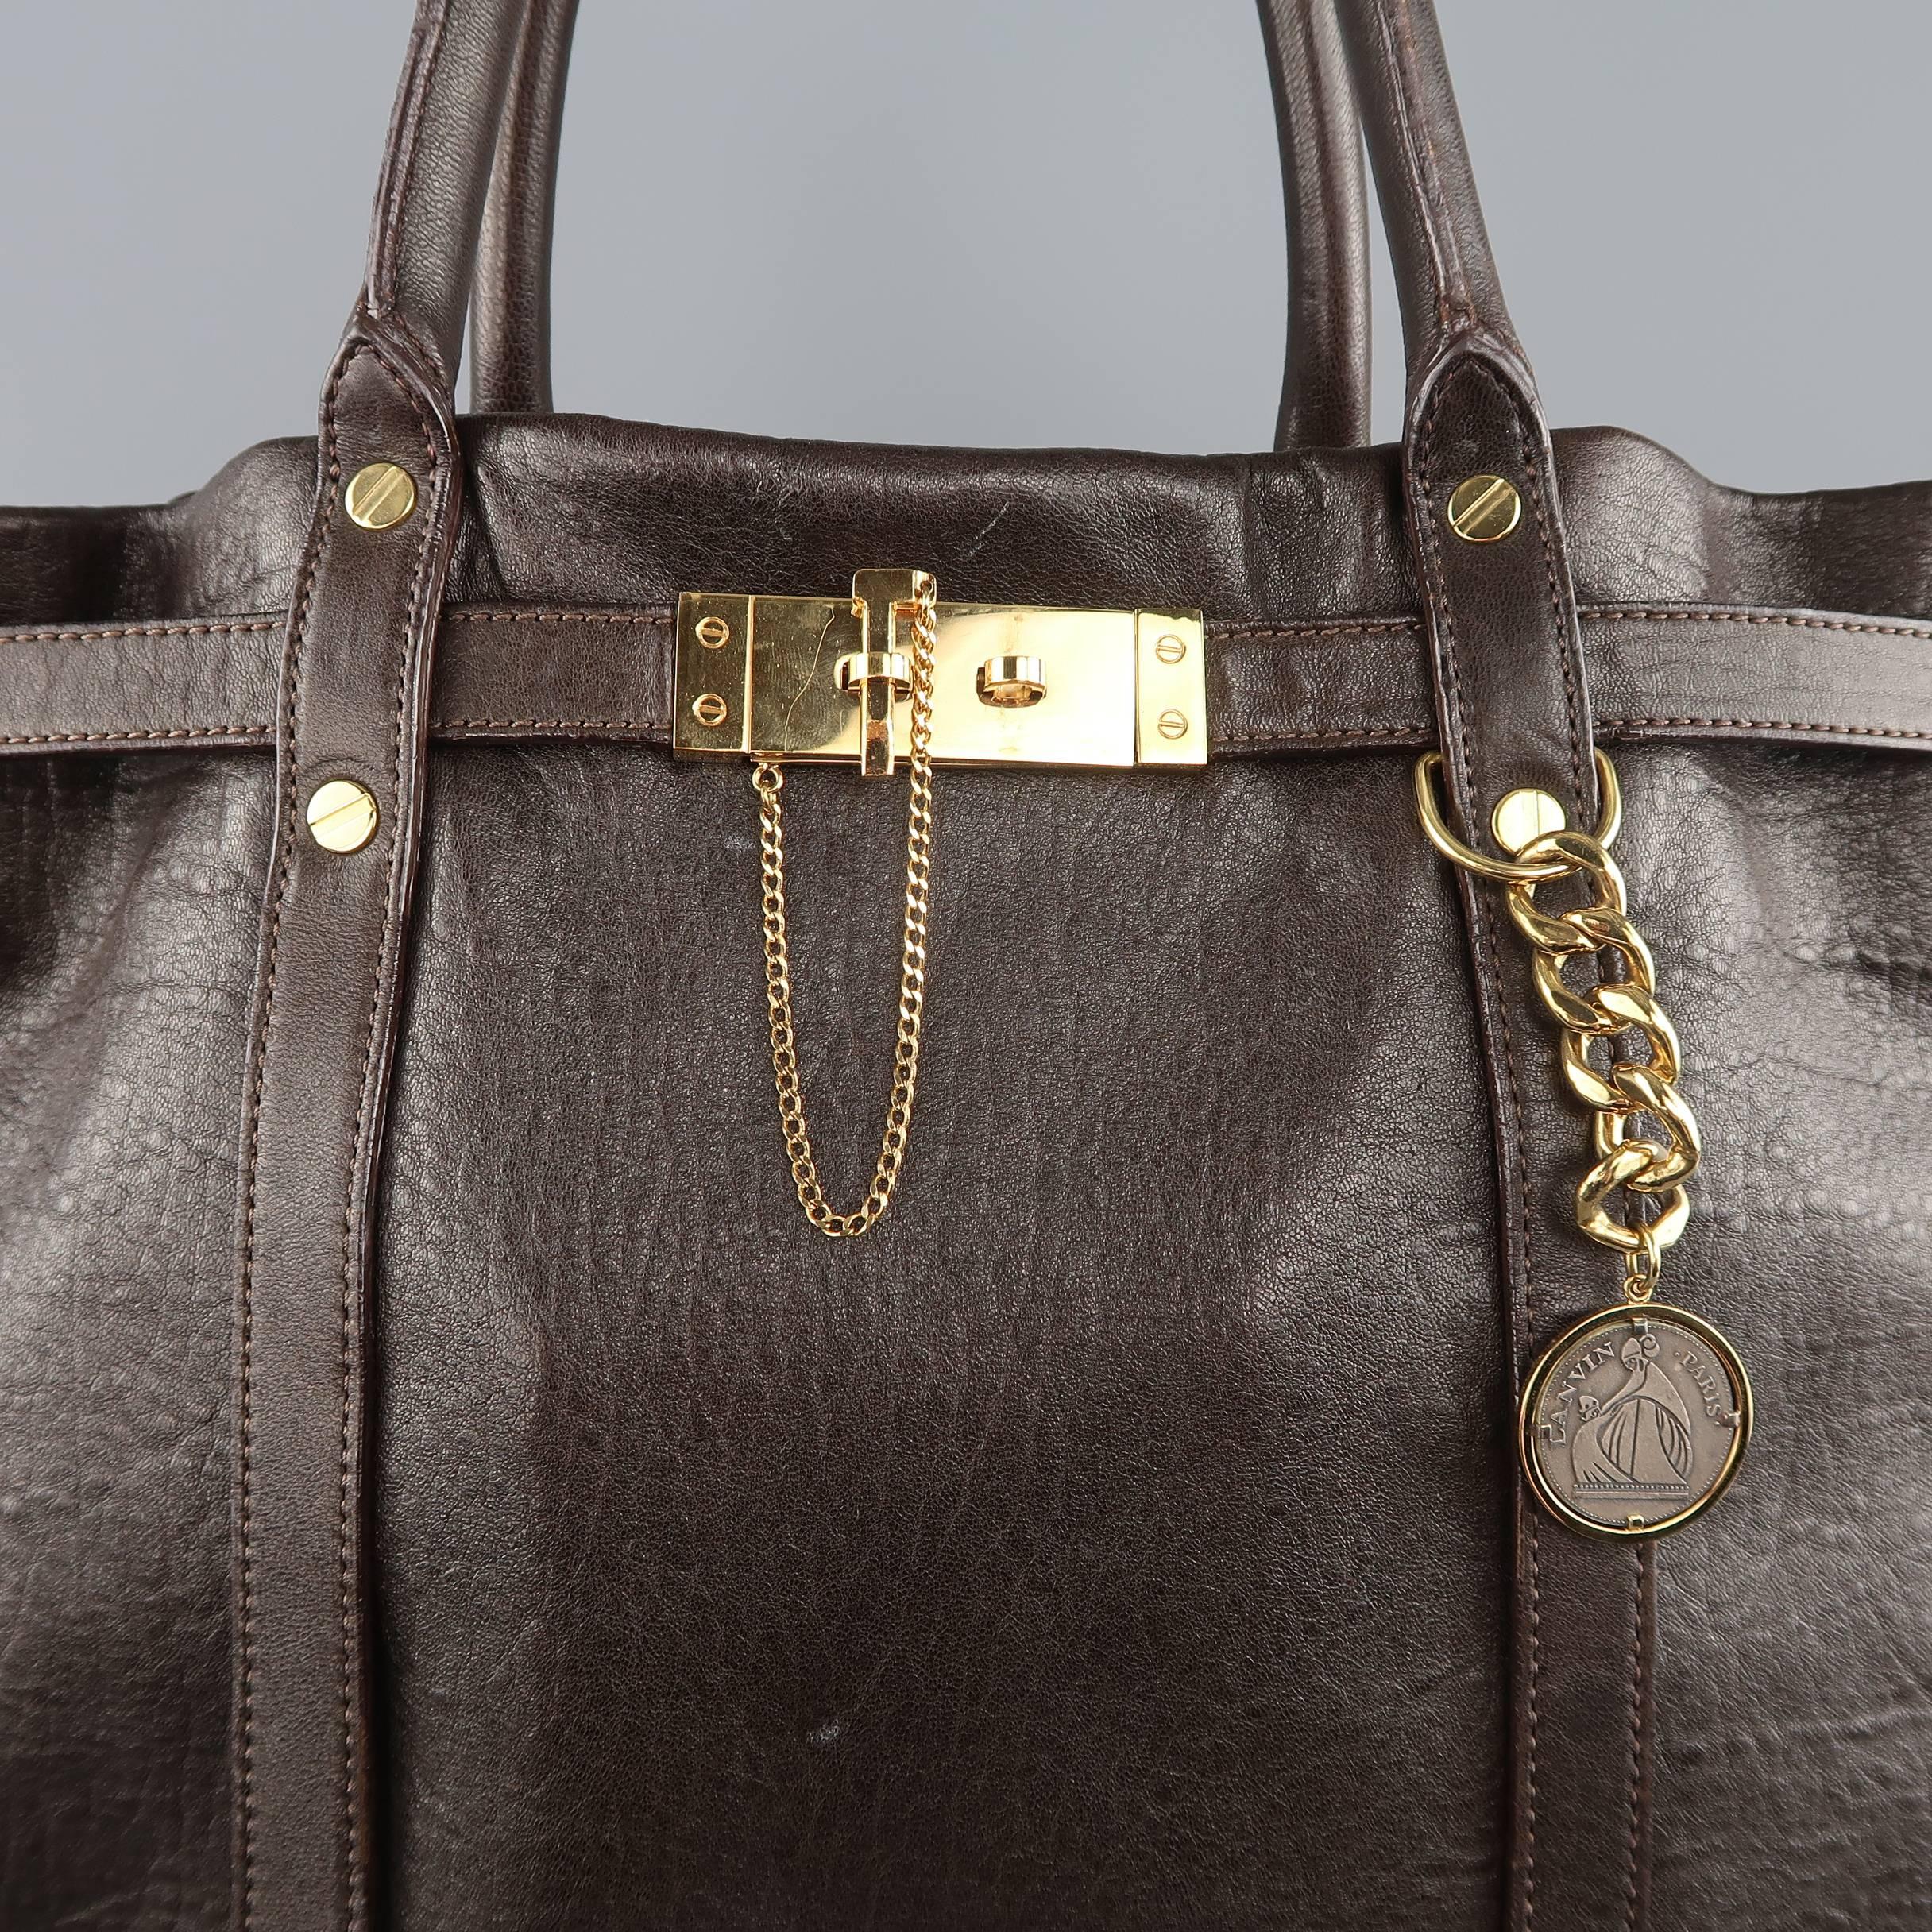 LANVIN tote bag comes in chocolate brown textured leather and features gold tone screw hardware, double top covered handles and top belt with lock detail. Wear throughout. Missing pouch. As-Is.  Made in France.
 
Good Pre-Owned Condition.
